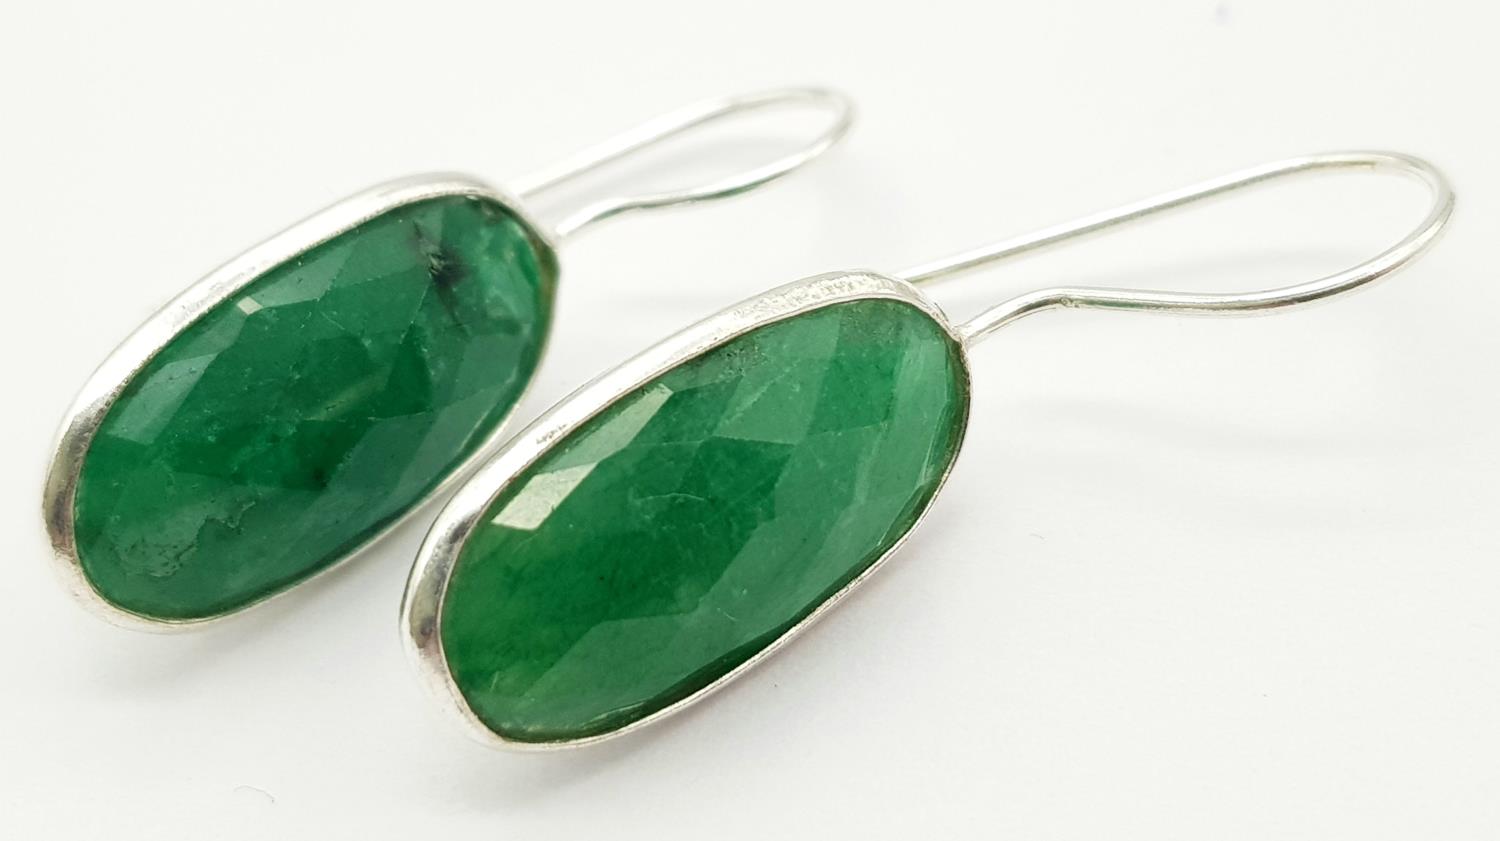 An Emerald Gemstone Long Chain necklace with Matching Drop Earrings. Set in 925 silver. 64cm - Image 2 of 5